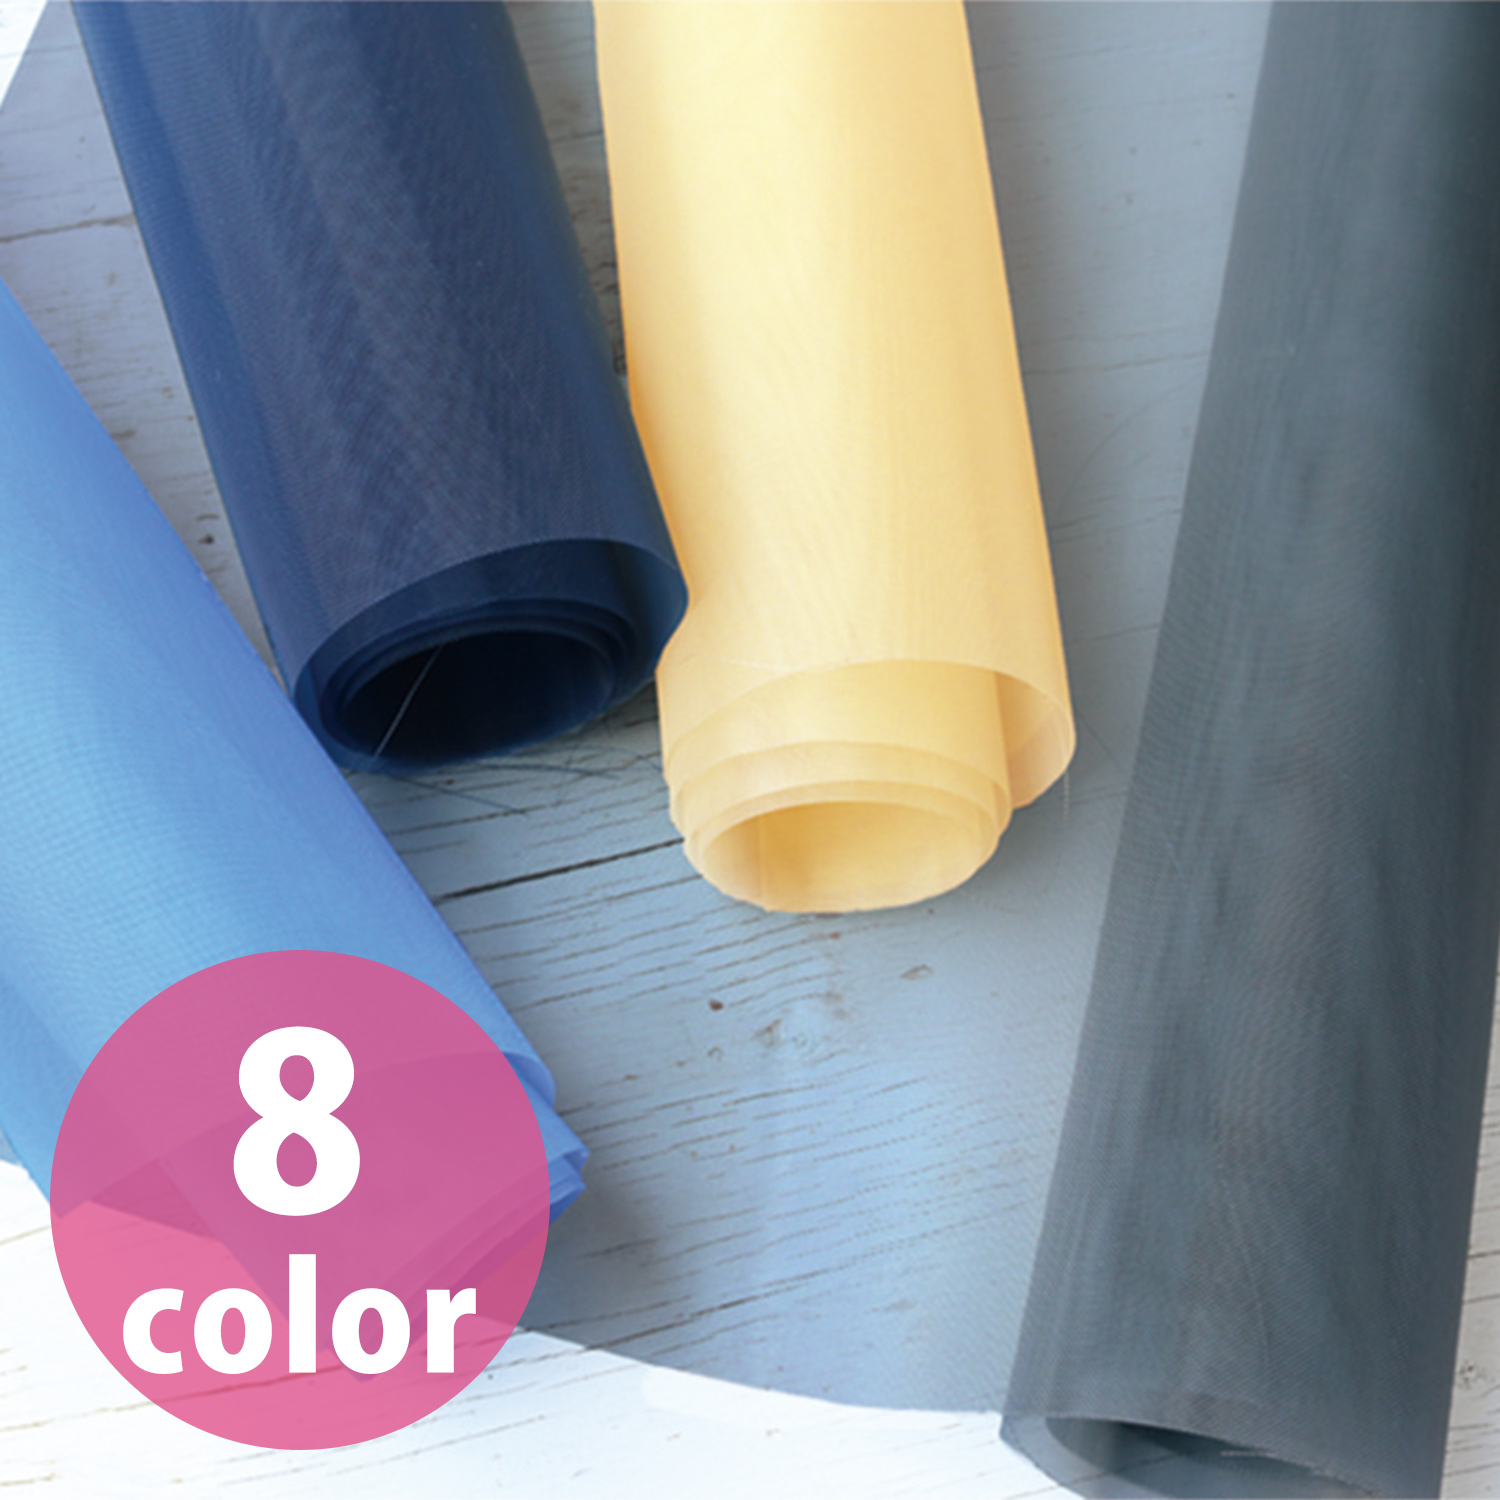 L1100-50 Nylon tulle fabric, approx. 50m/unit (roll)